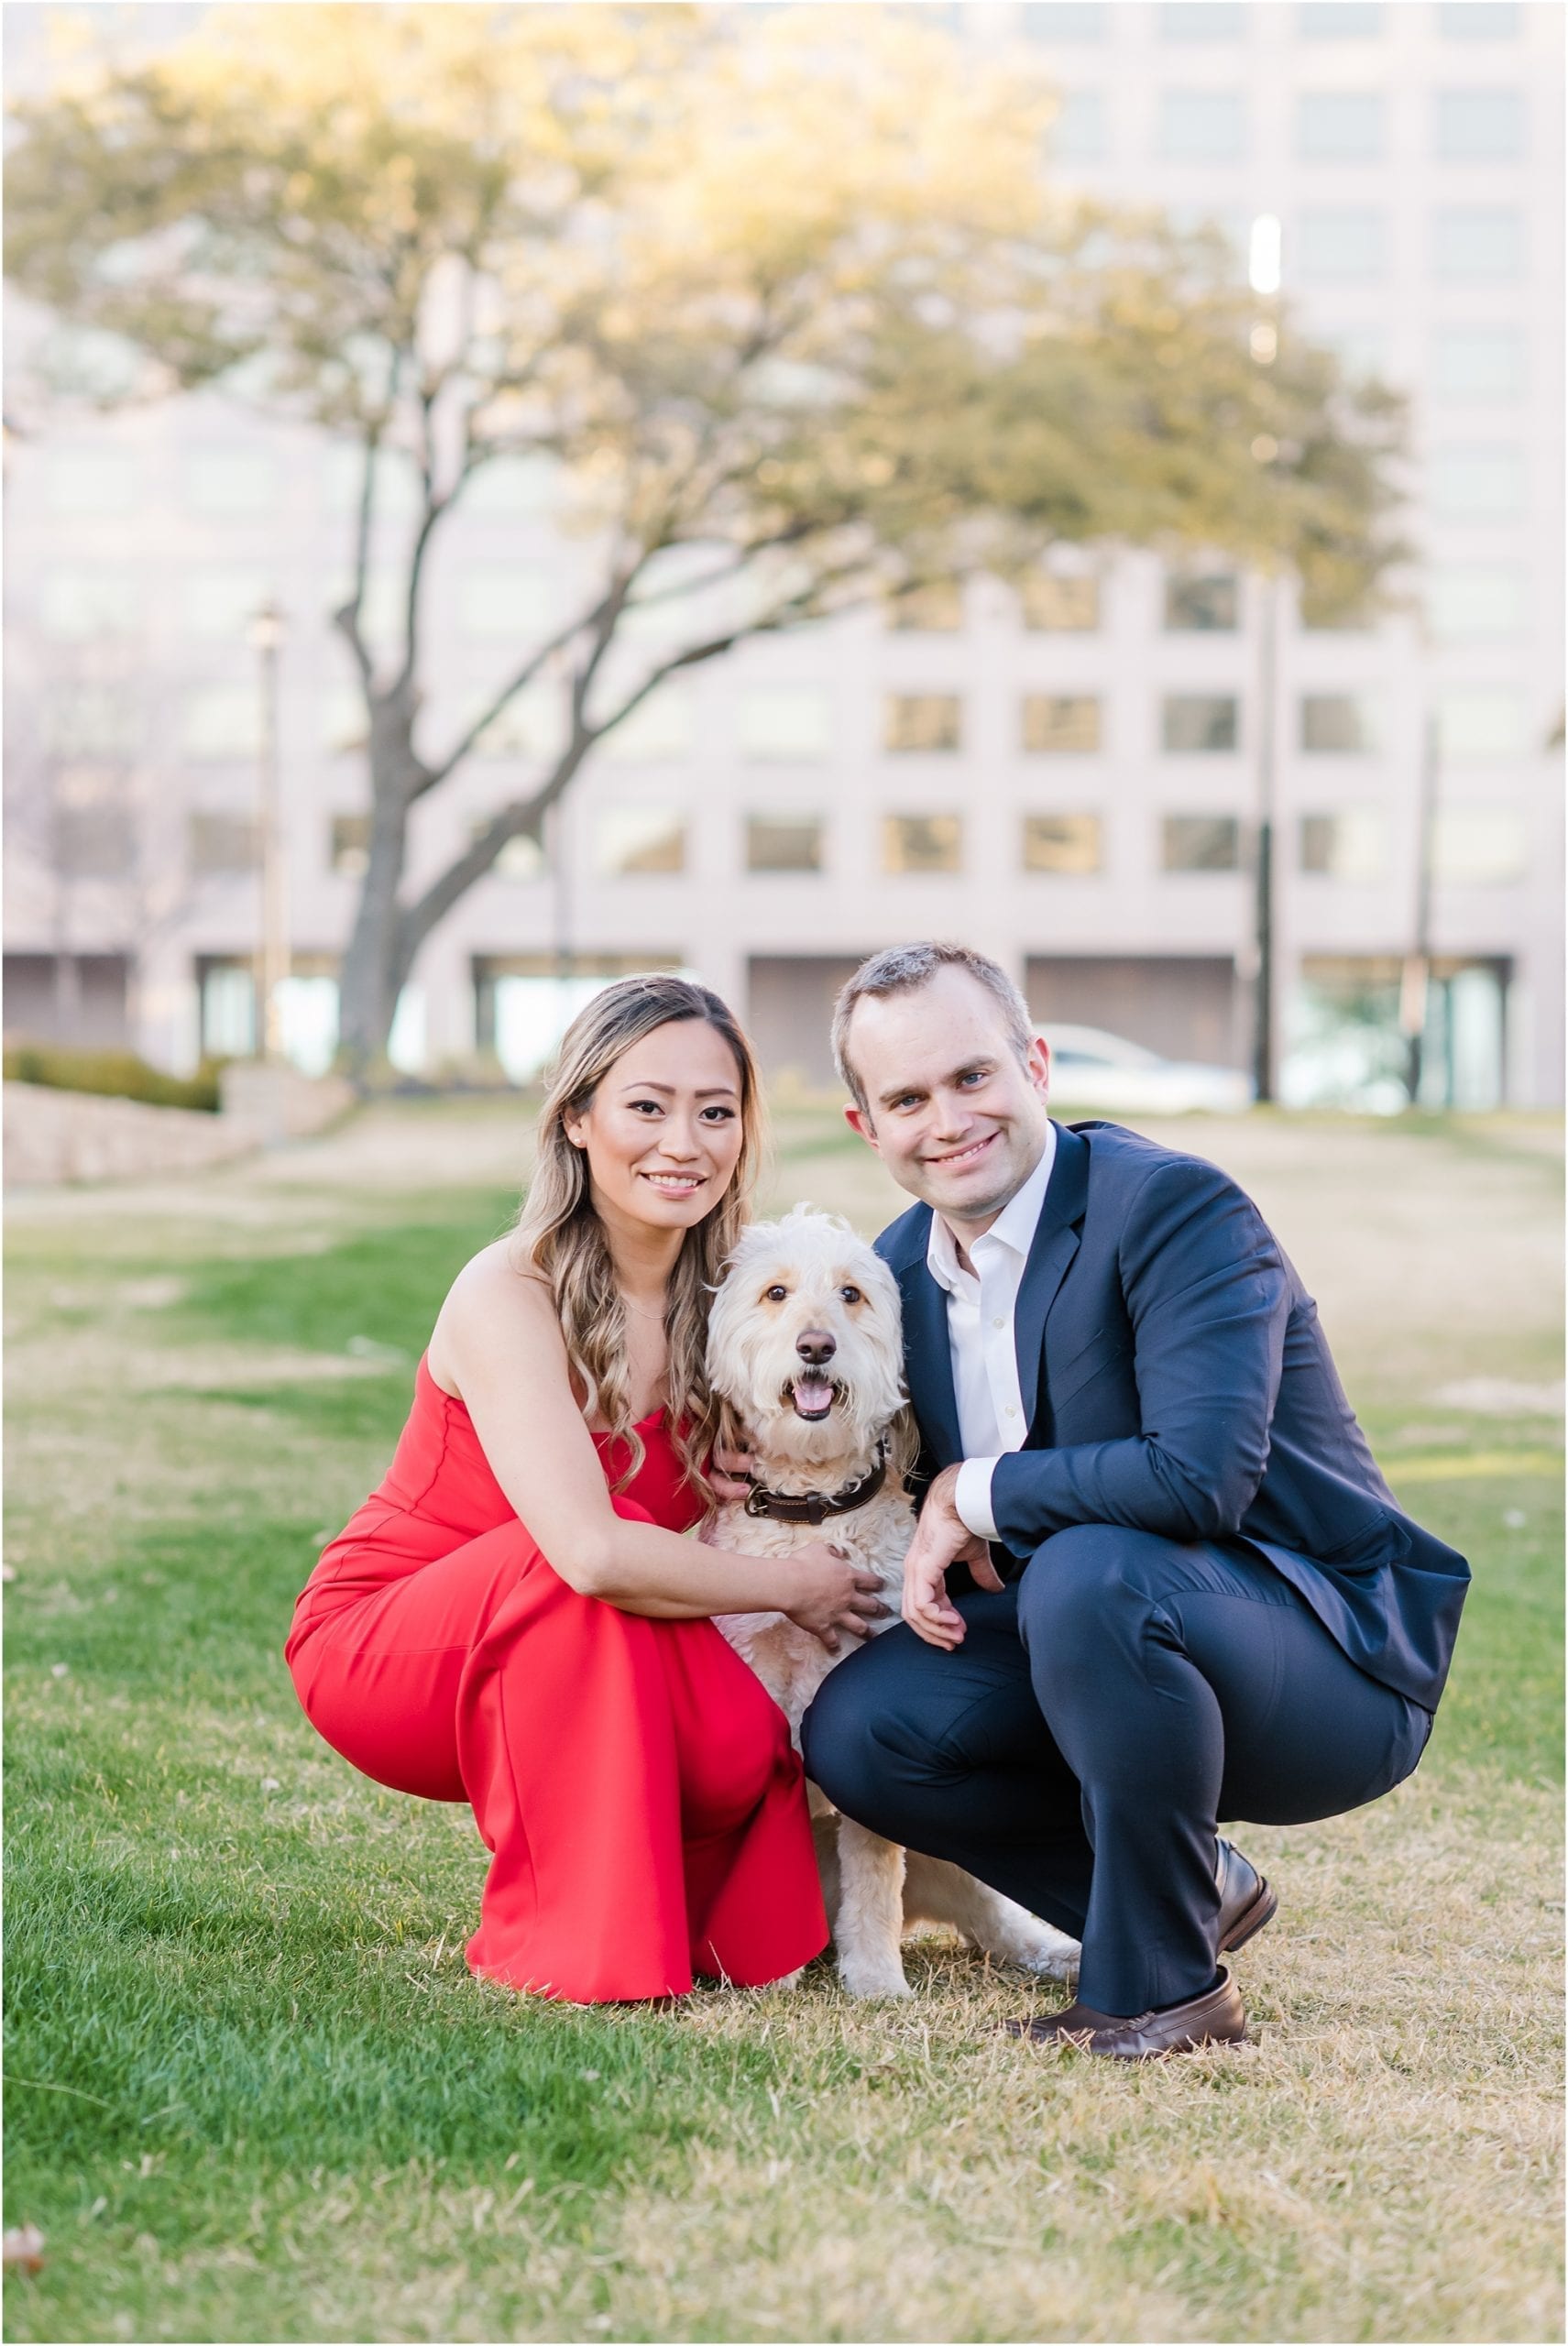 MaggShots Photography, DFW engagement Photographer, Las Colinas Canals engagement Photographer, Las Colinas Canals, Las Colinas engagements, Las Colinas Photographer, Dallas engagement Photographer, fur baby, dog